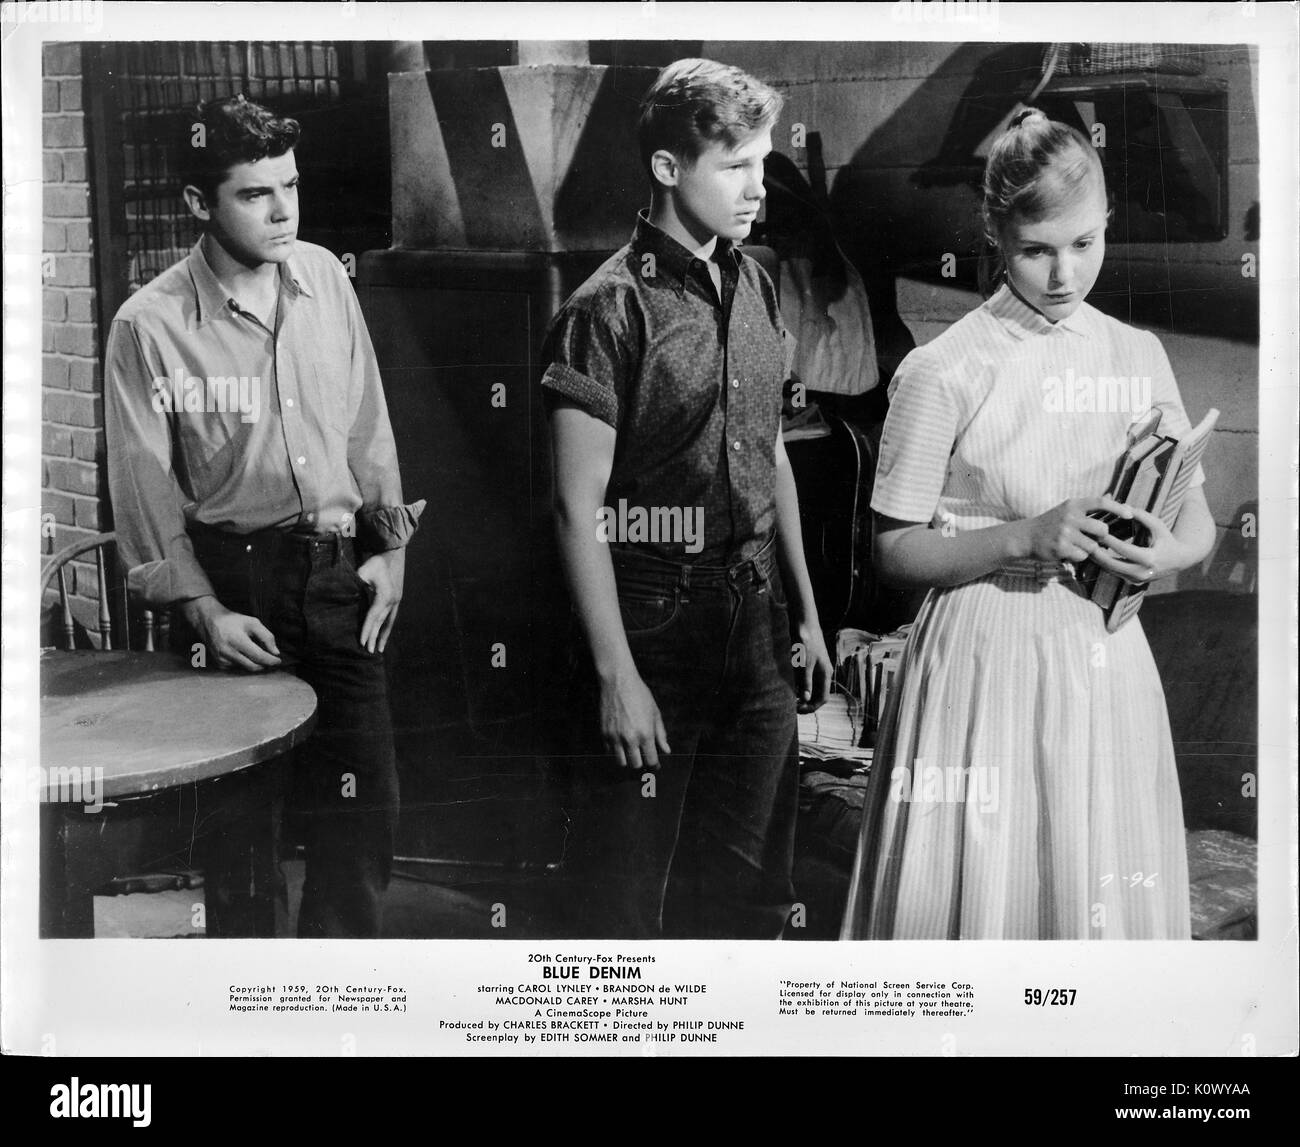 A movie still scene from 'Blue Denim' (1959 20th Century Fox film), showing three serious-looking teenagers standing about, a girl and two boys, with the girl looking down while listening to the boy explaining something behind her and the other boy in long-sleeved shirt looking on, 1959. Stock Photo